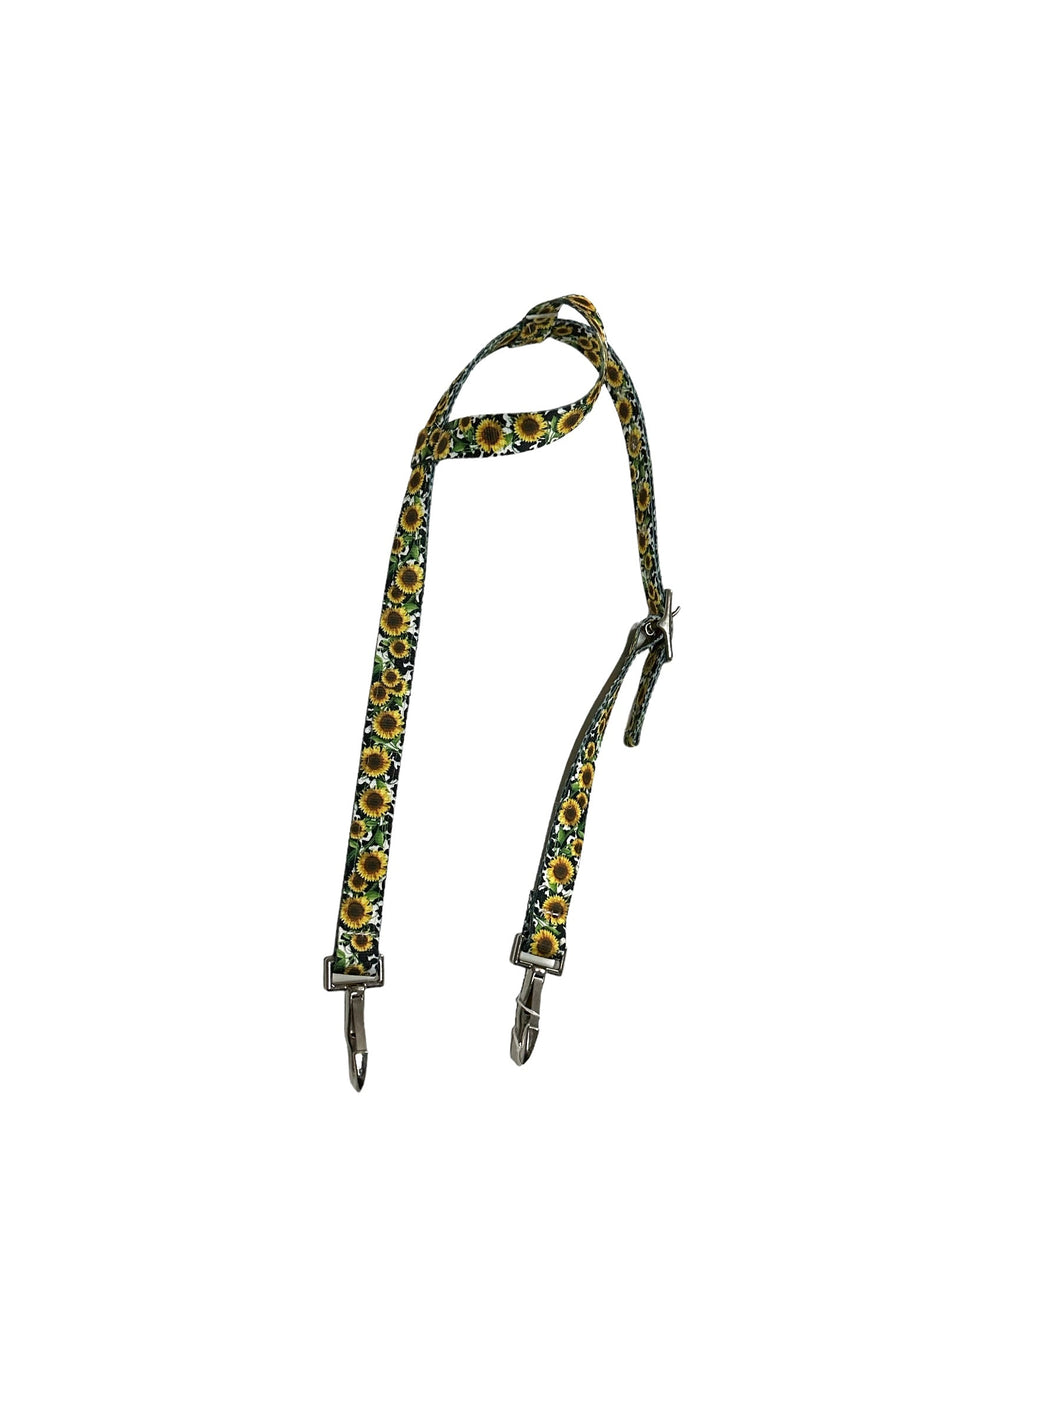 One Ear Headstall HALLOWEEN  with quick change clips horse size